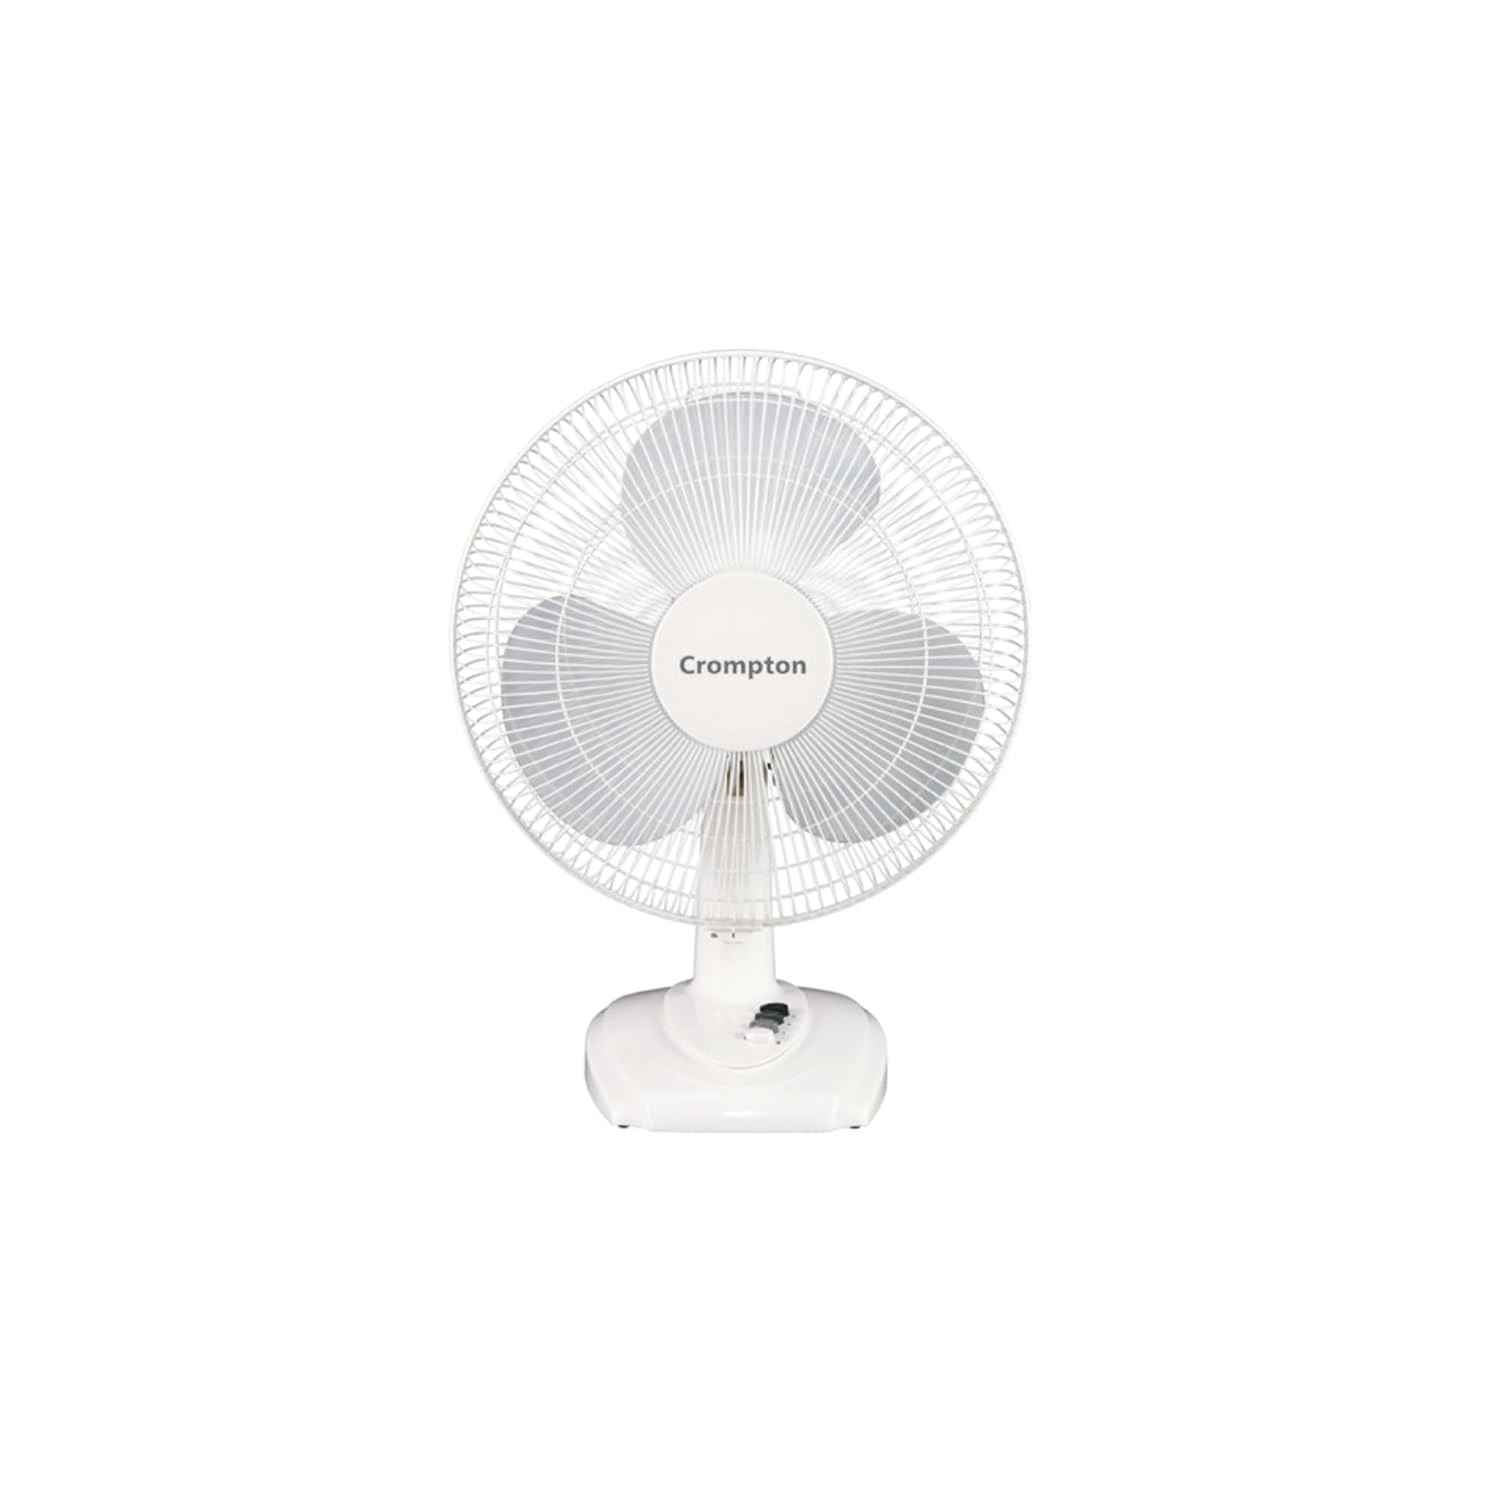 Crompton Wave Plus 400-mm High Speed Oscillating Table Fan for Home and KitchenKD WhiteHeavy Duty